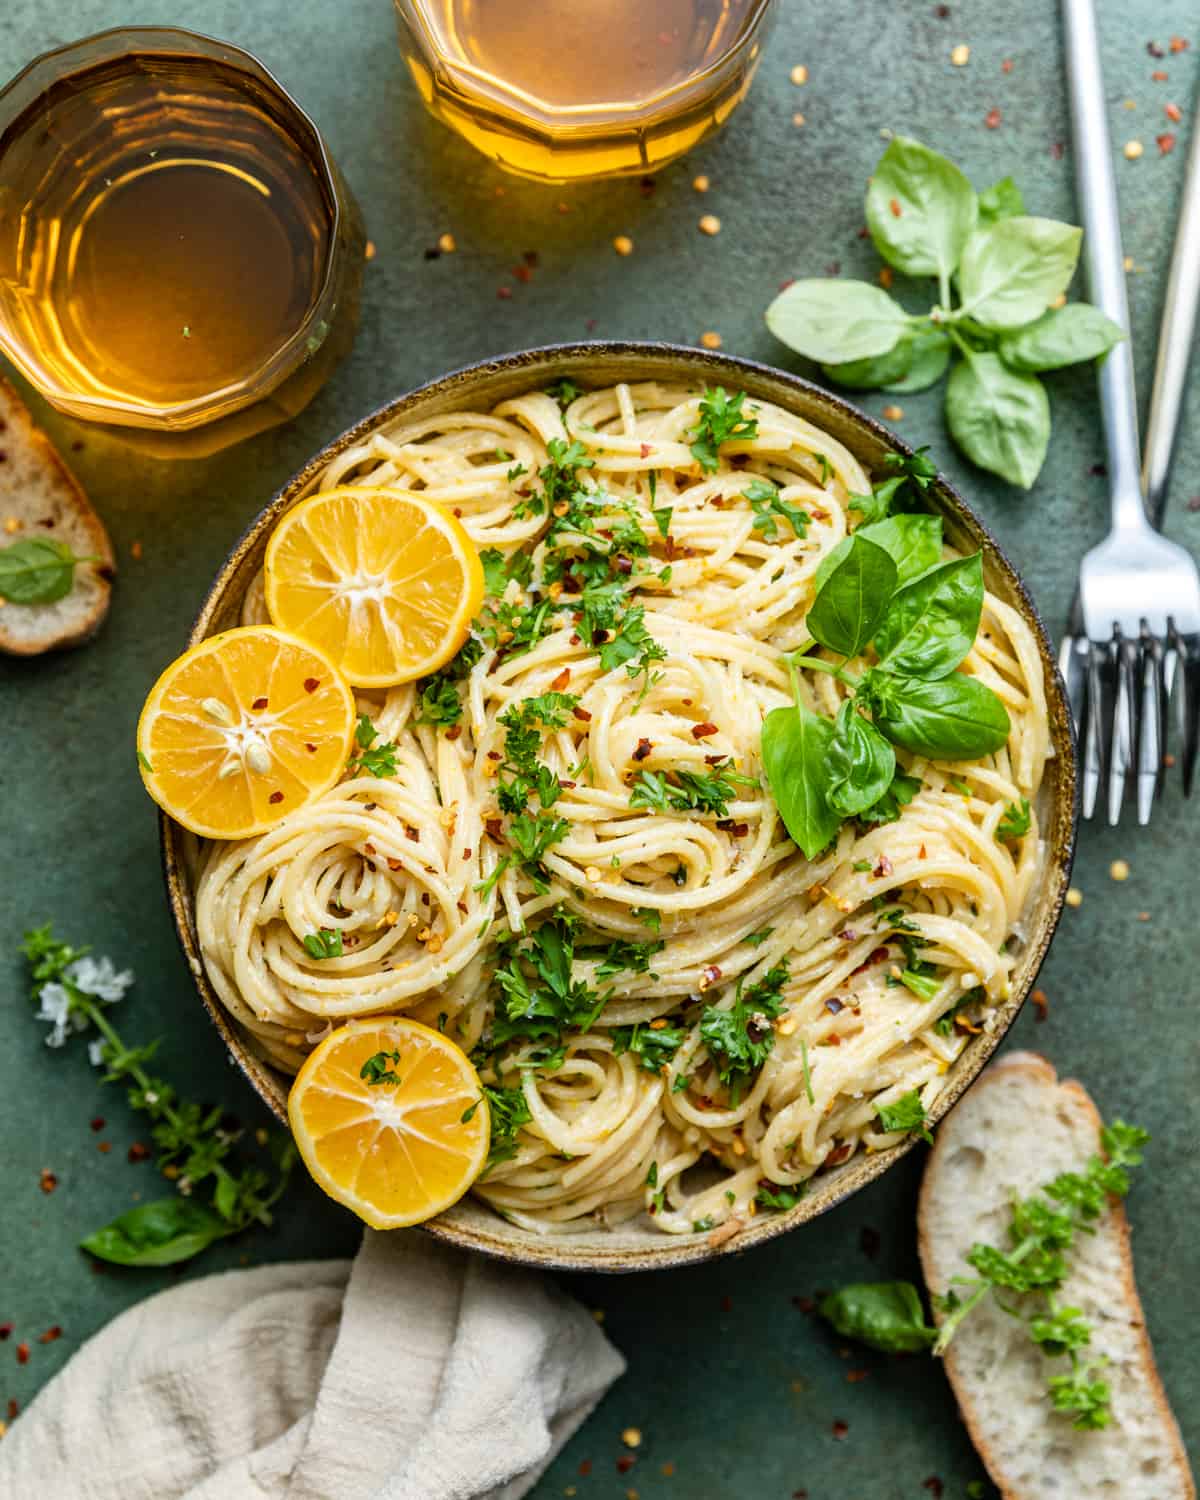 lemon garlic pasta in a bowl with lemons, basil, and chopped parsley on top.